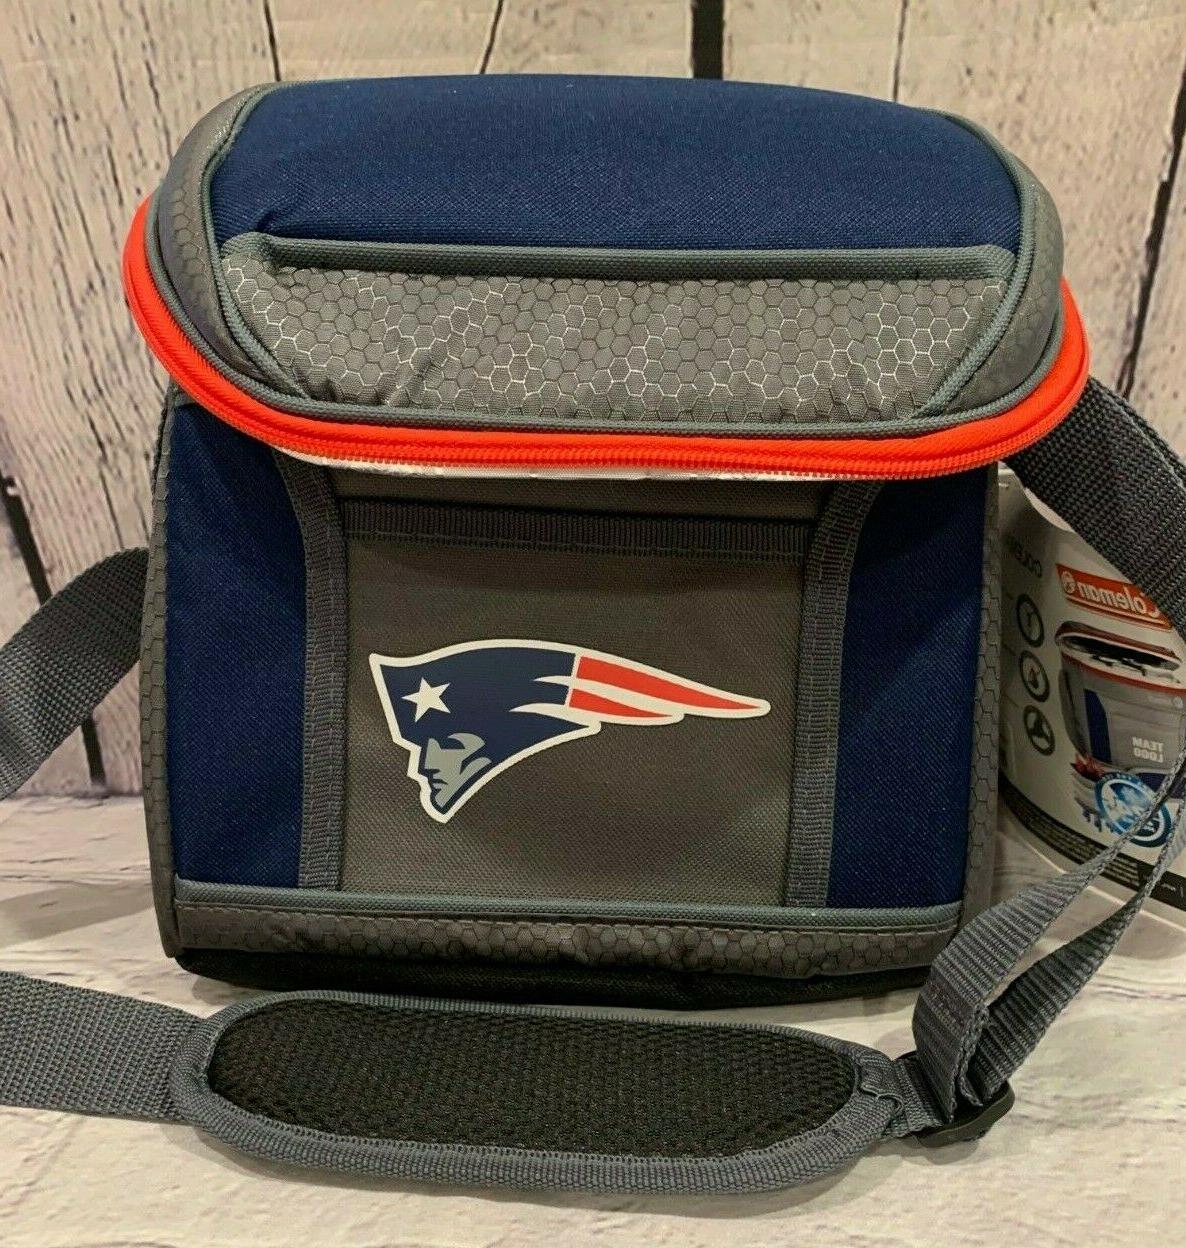 New New England Patriots Coleman Cooler Lunch Box